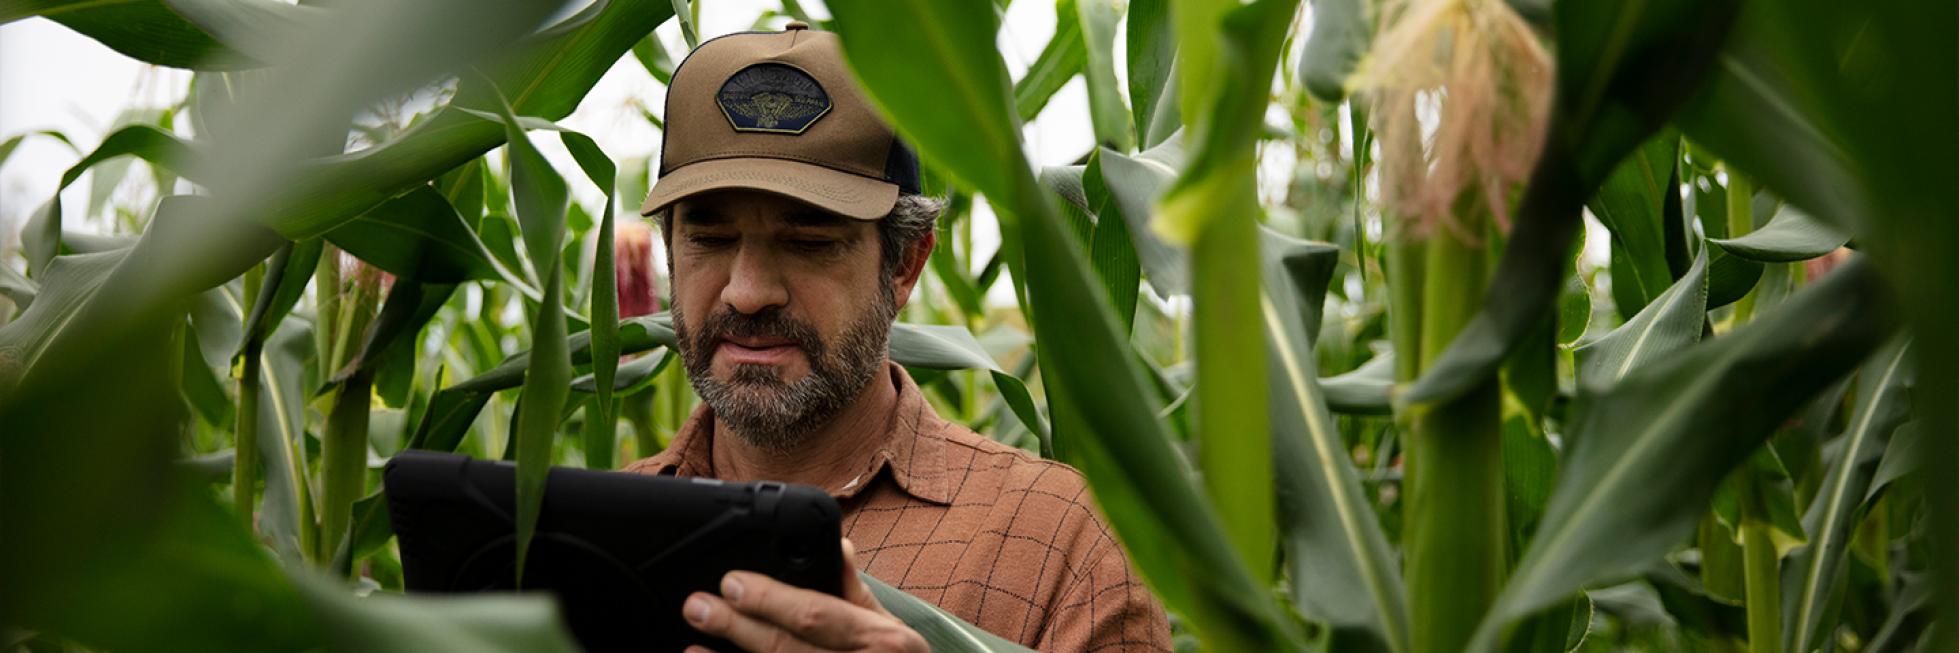 Farmer inspecting content displayed on tablet 